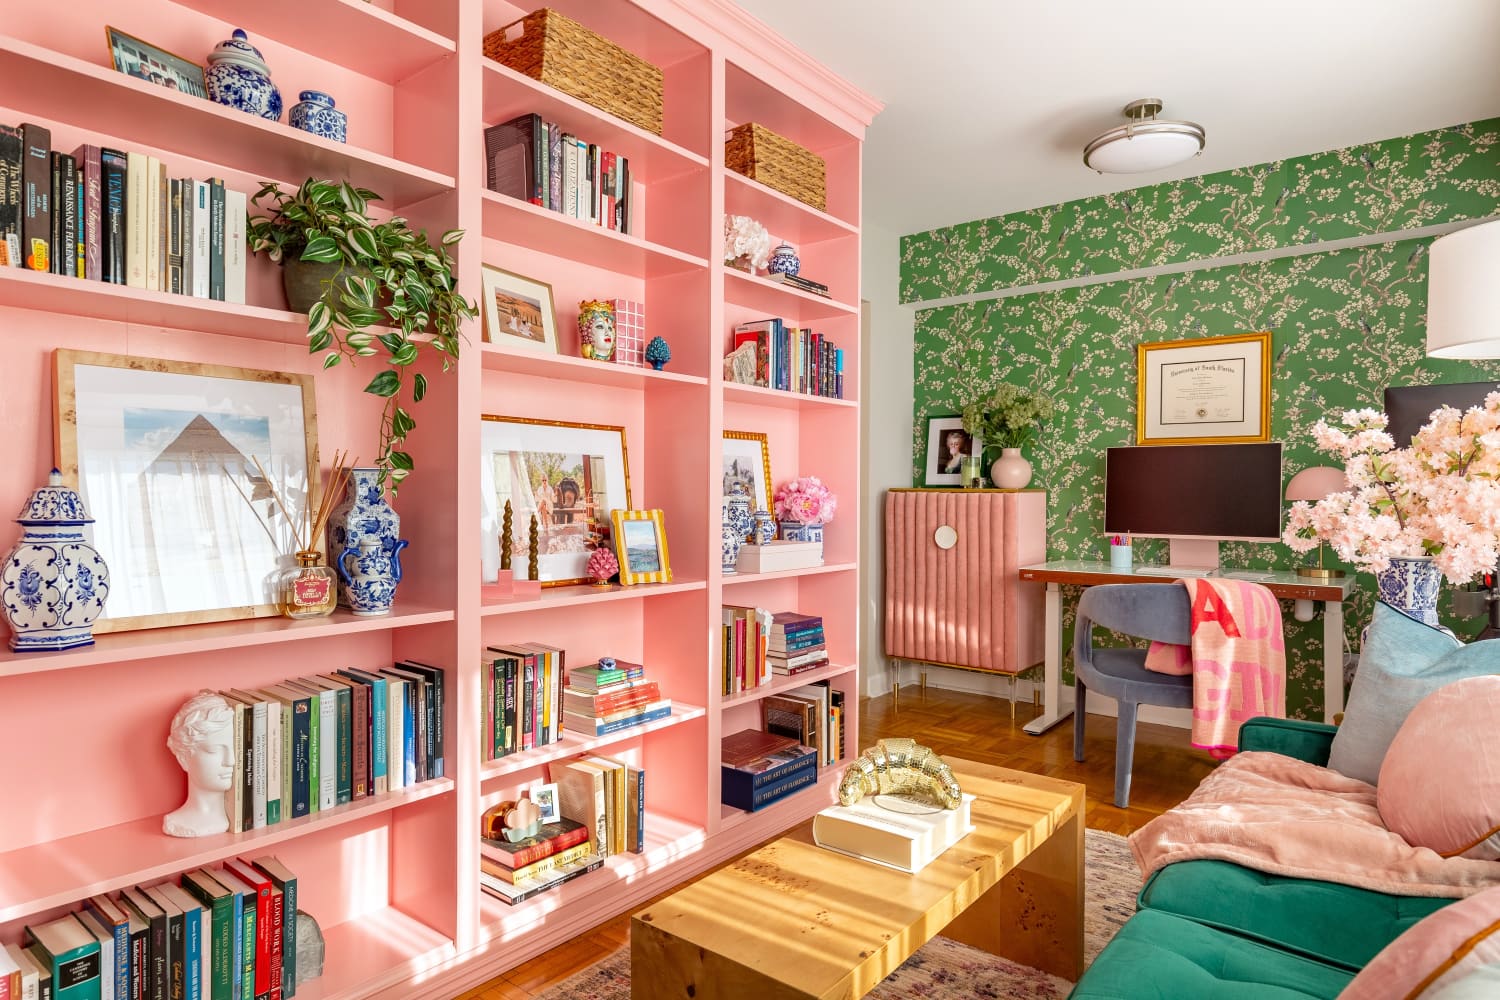 This Maximalist Home Trend Is Like If Gallery Walls and Bookshelves Had a Baby